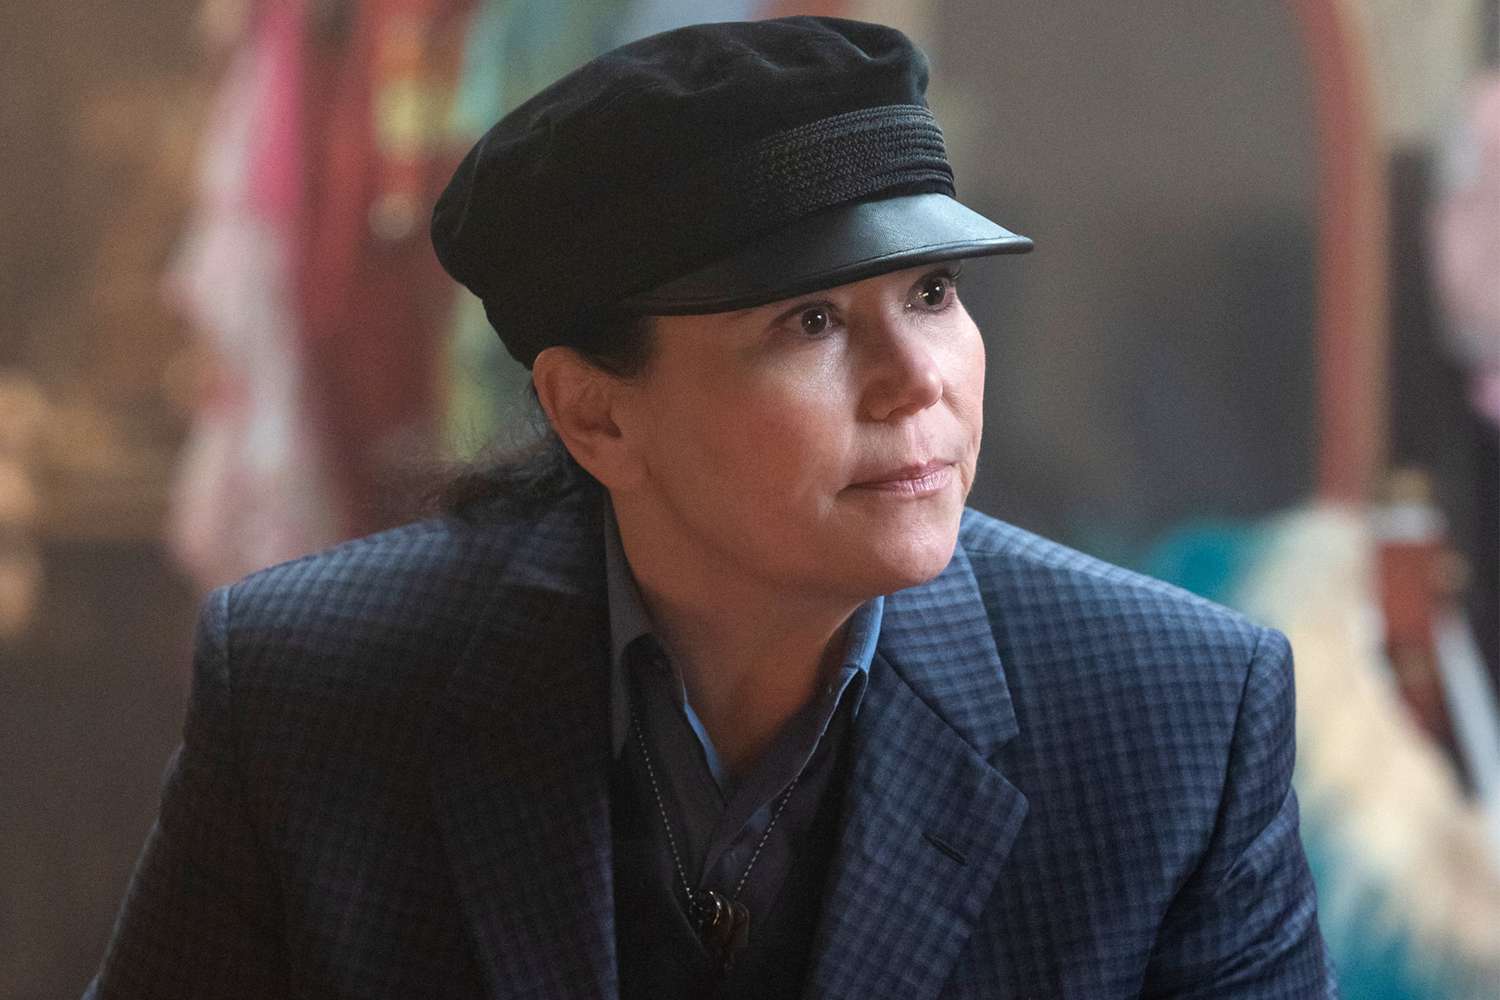 Alex Borstein on Susie’s ending in ‘The Marvelous Mrs. Maisel’